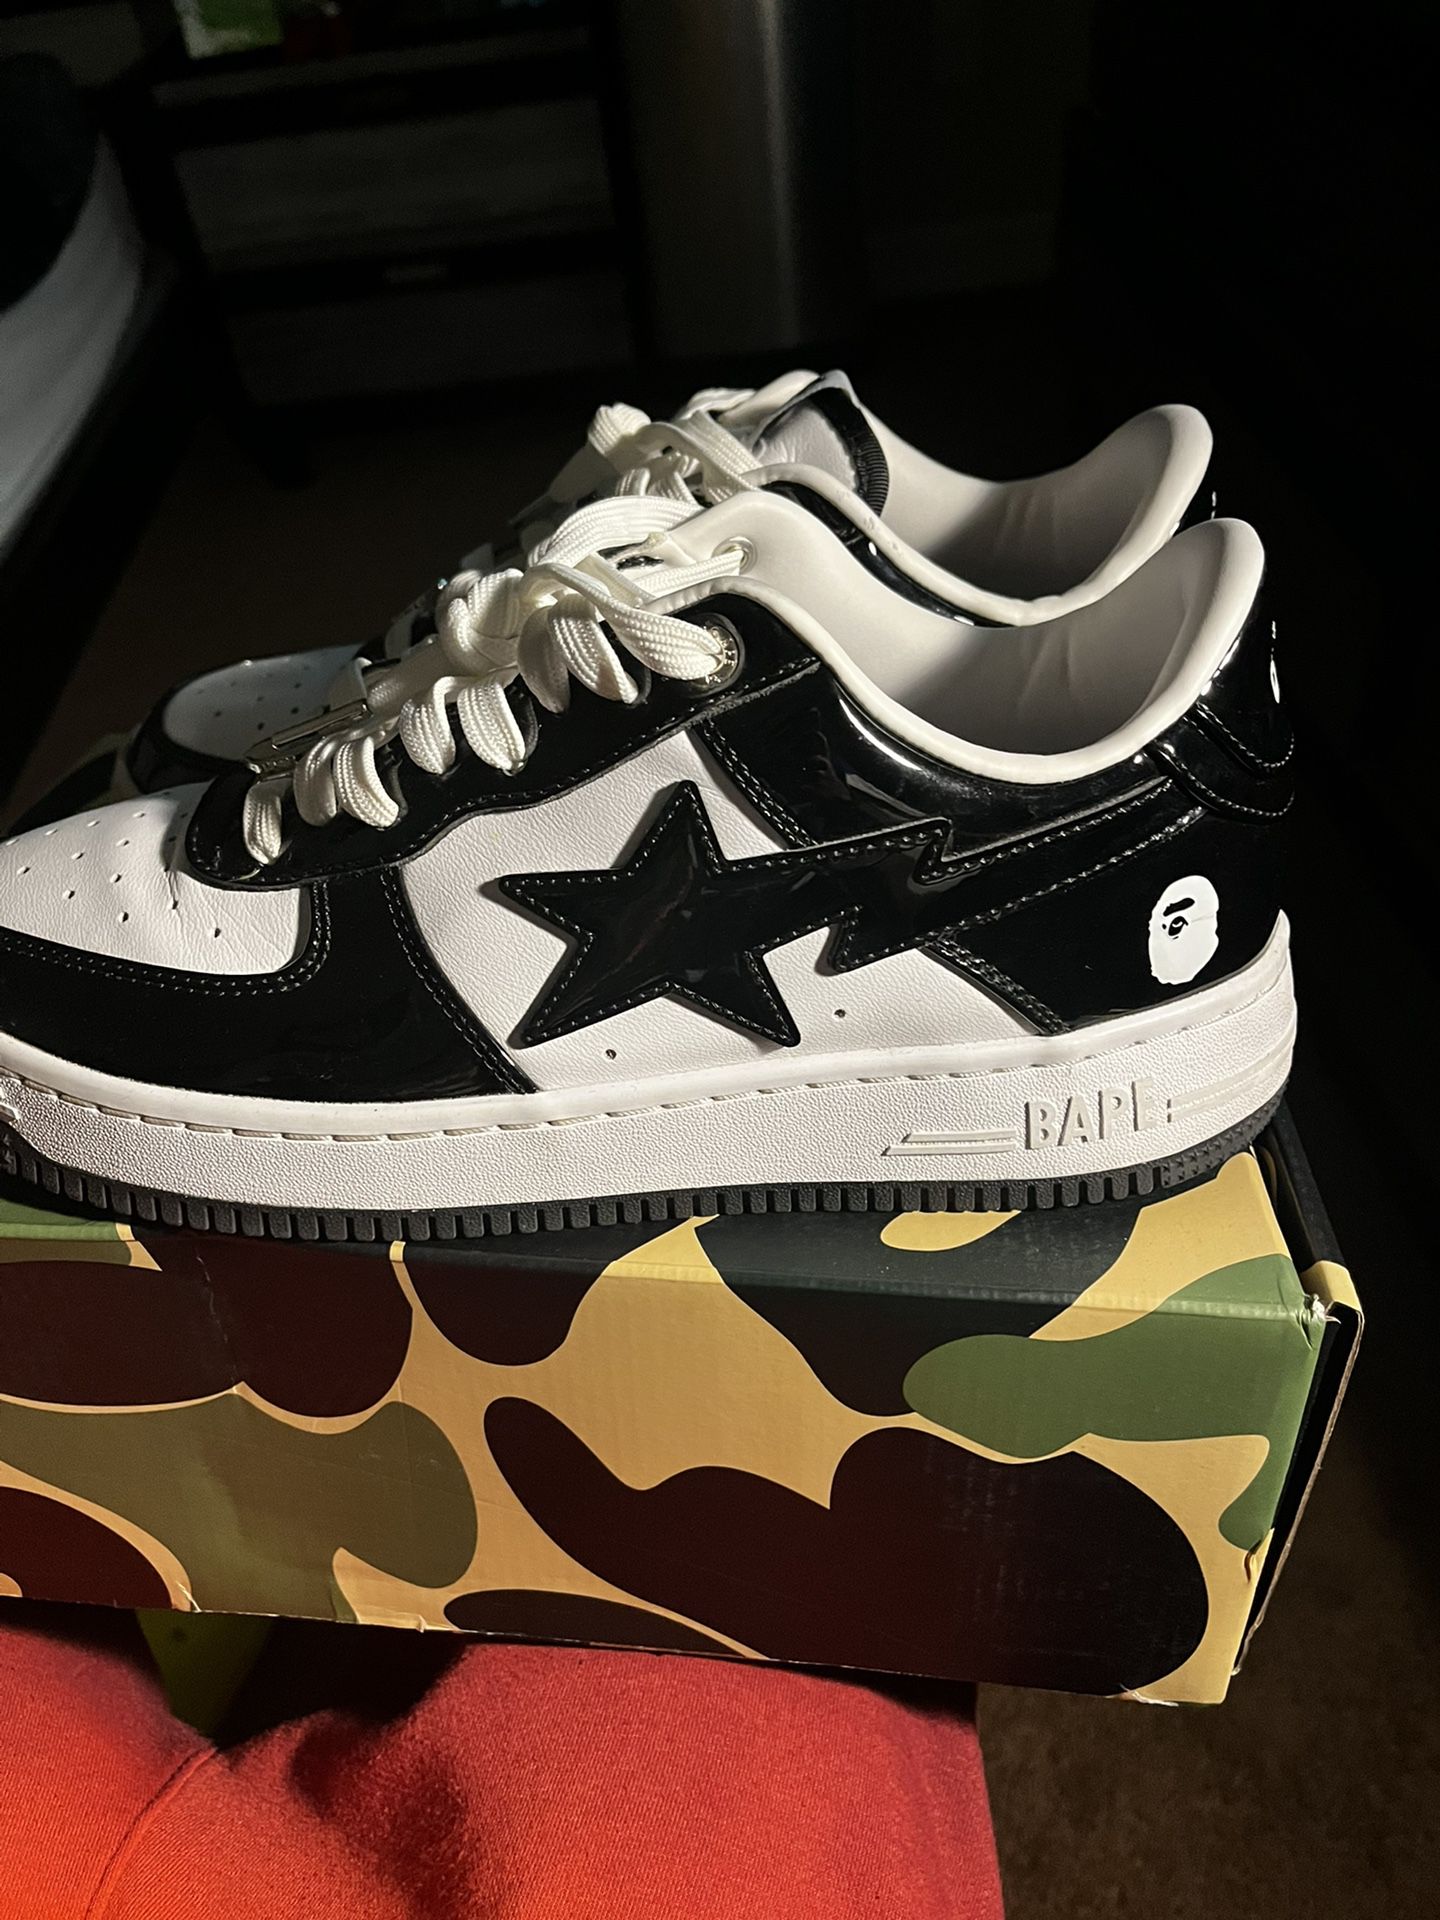 Black Patent Leather Bapestas Size 9.5 for Sale in Old Rvr-wnfre, TX ...